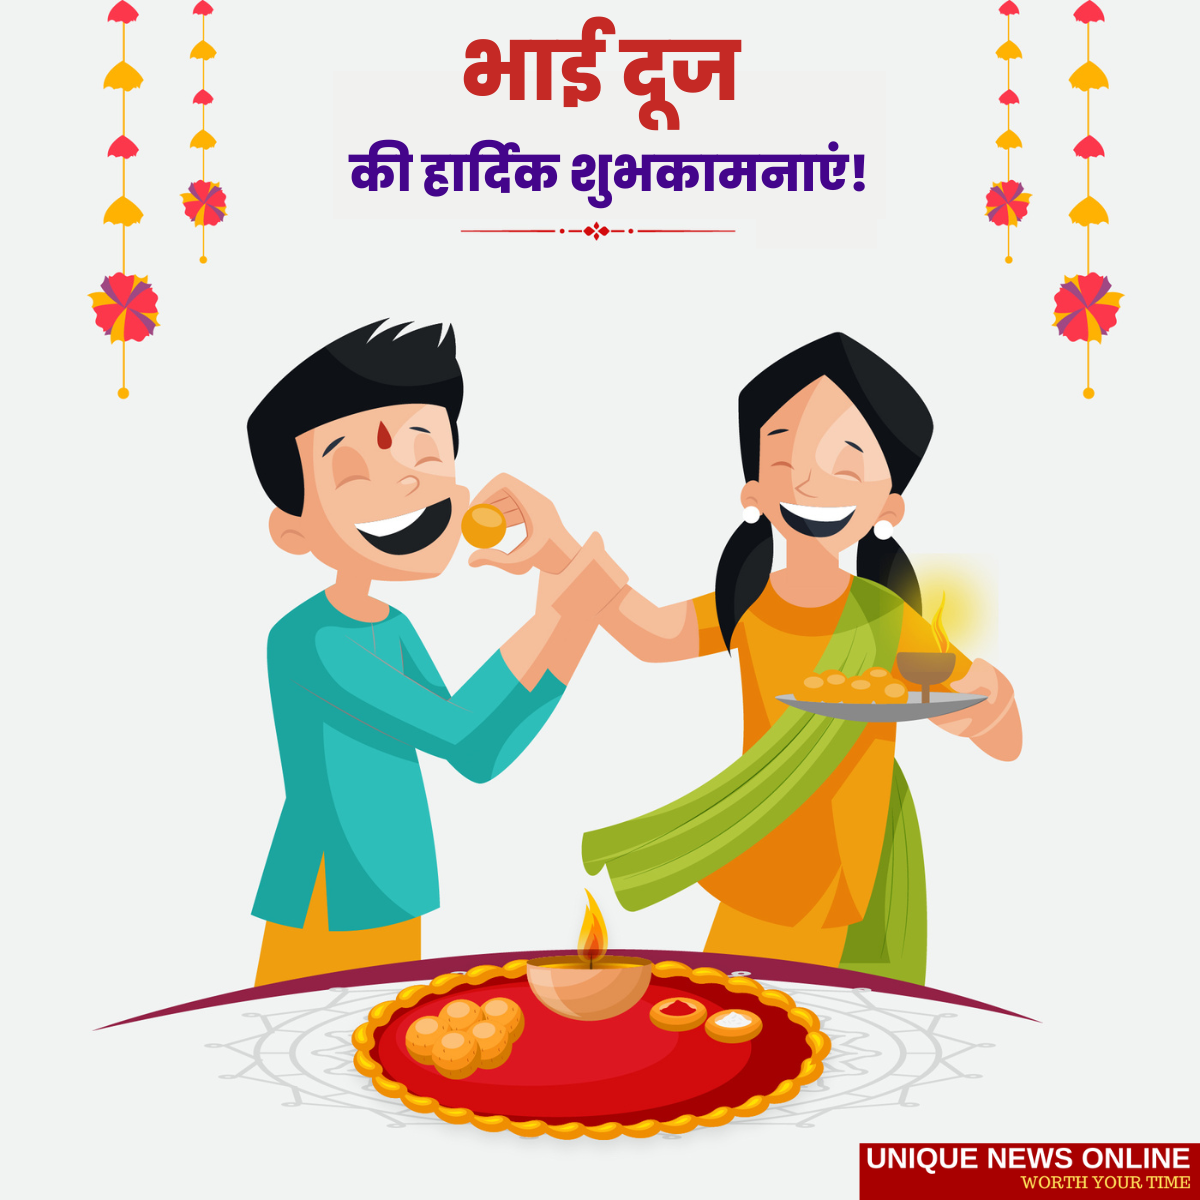 Happy Bhai Dooj 2022: Best Hindi Greetings, HD Images, Wishes, Messages, Quotes, Banners, and Shayari, For Brother/Sister